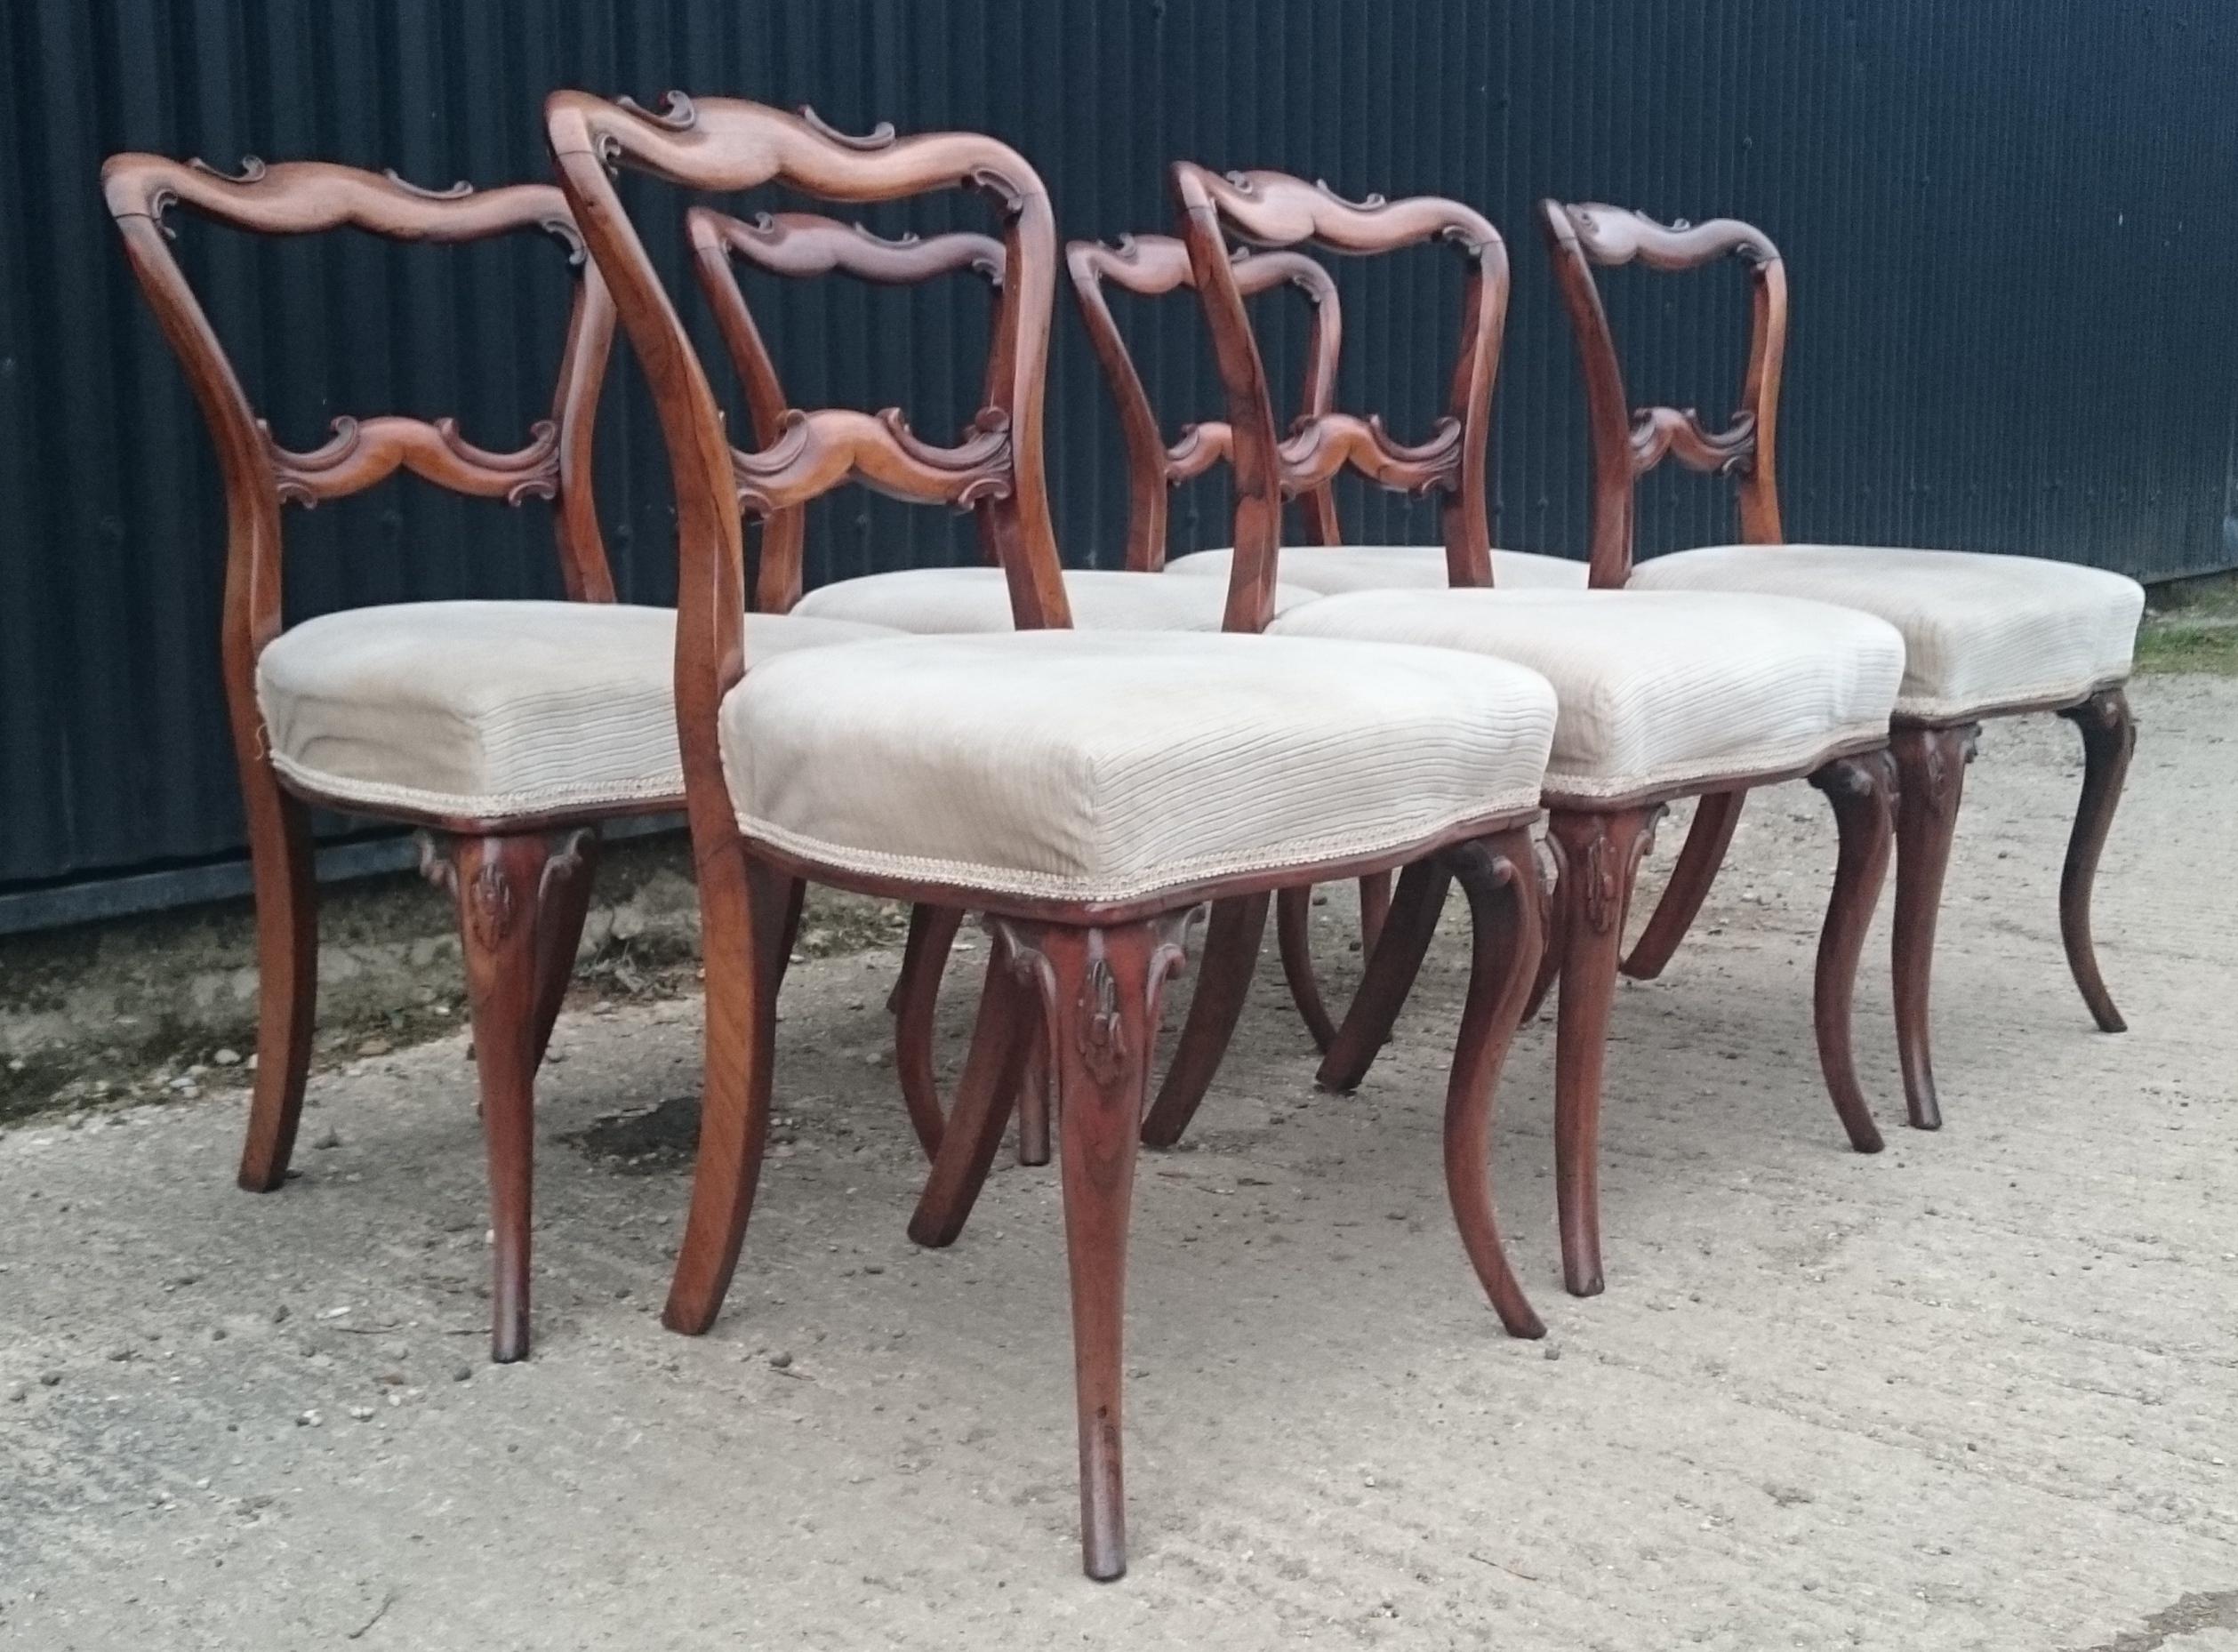 Set of six antique dining chairs standing on elegant cabriole legs. These chairs have the earlier type of corner stretchers which would indicate that they are an early version of this design. This is a very Fine quality set of chairs and the